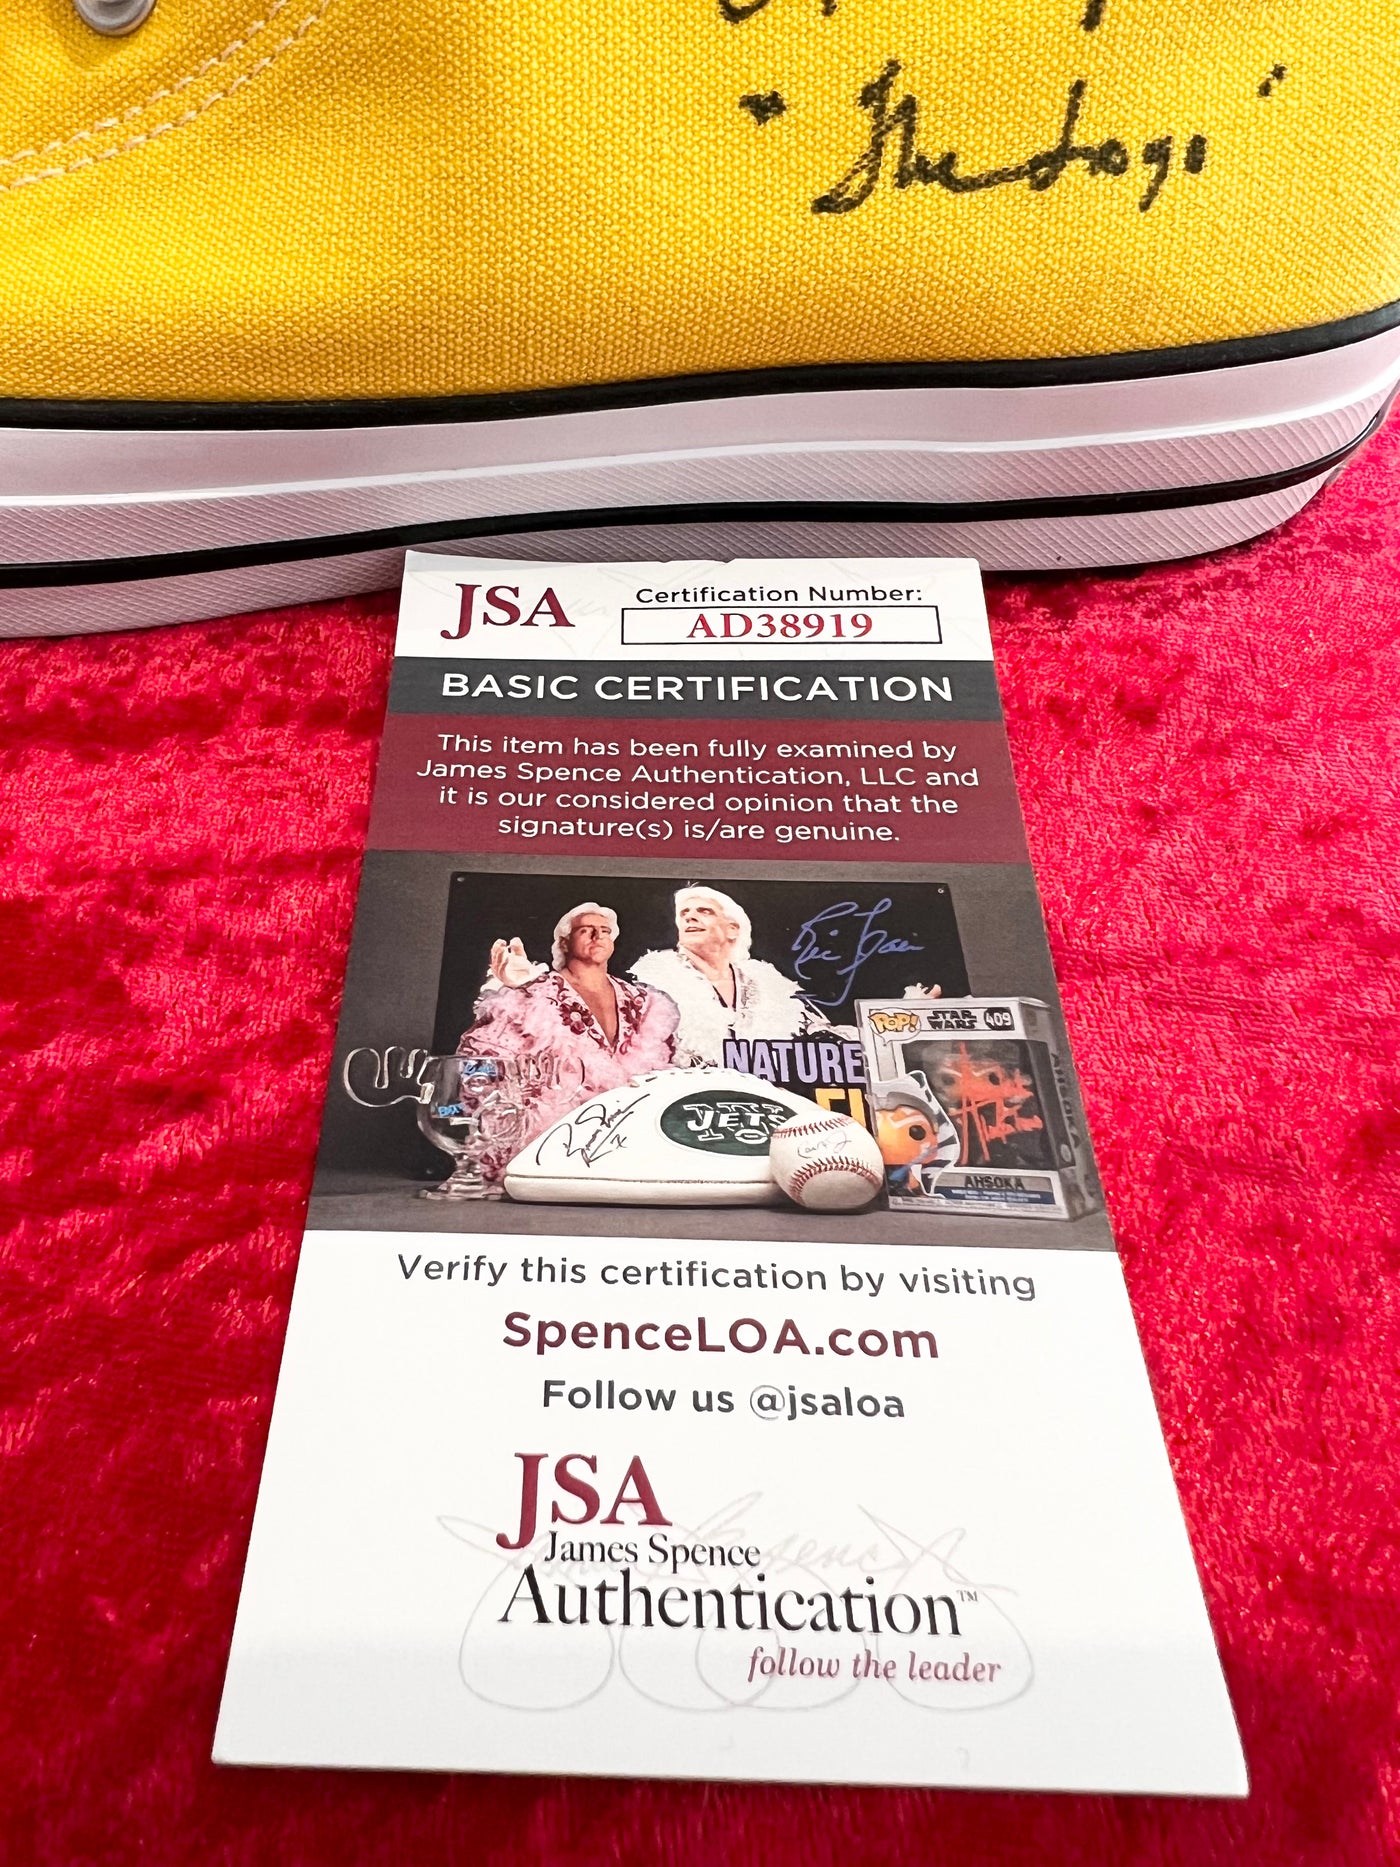 Jerry West Signed Converse Shoe Inscribed The logo RARE